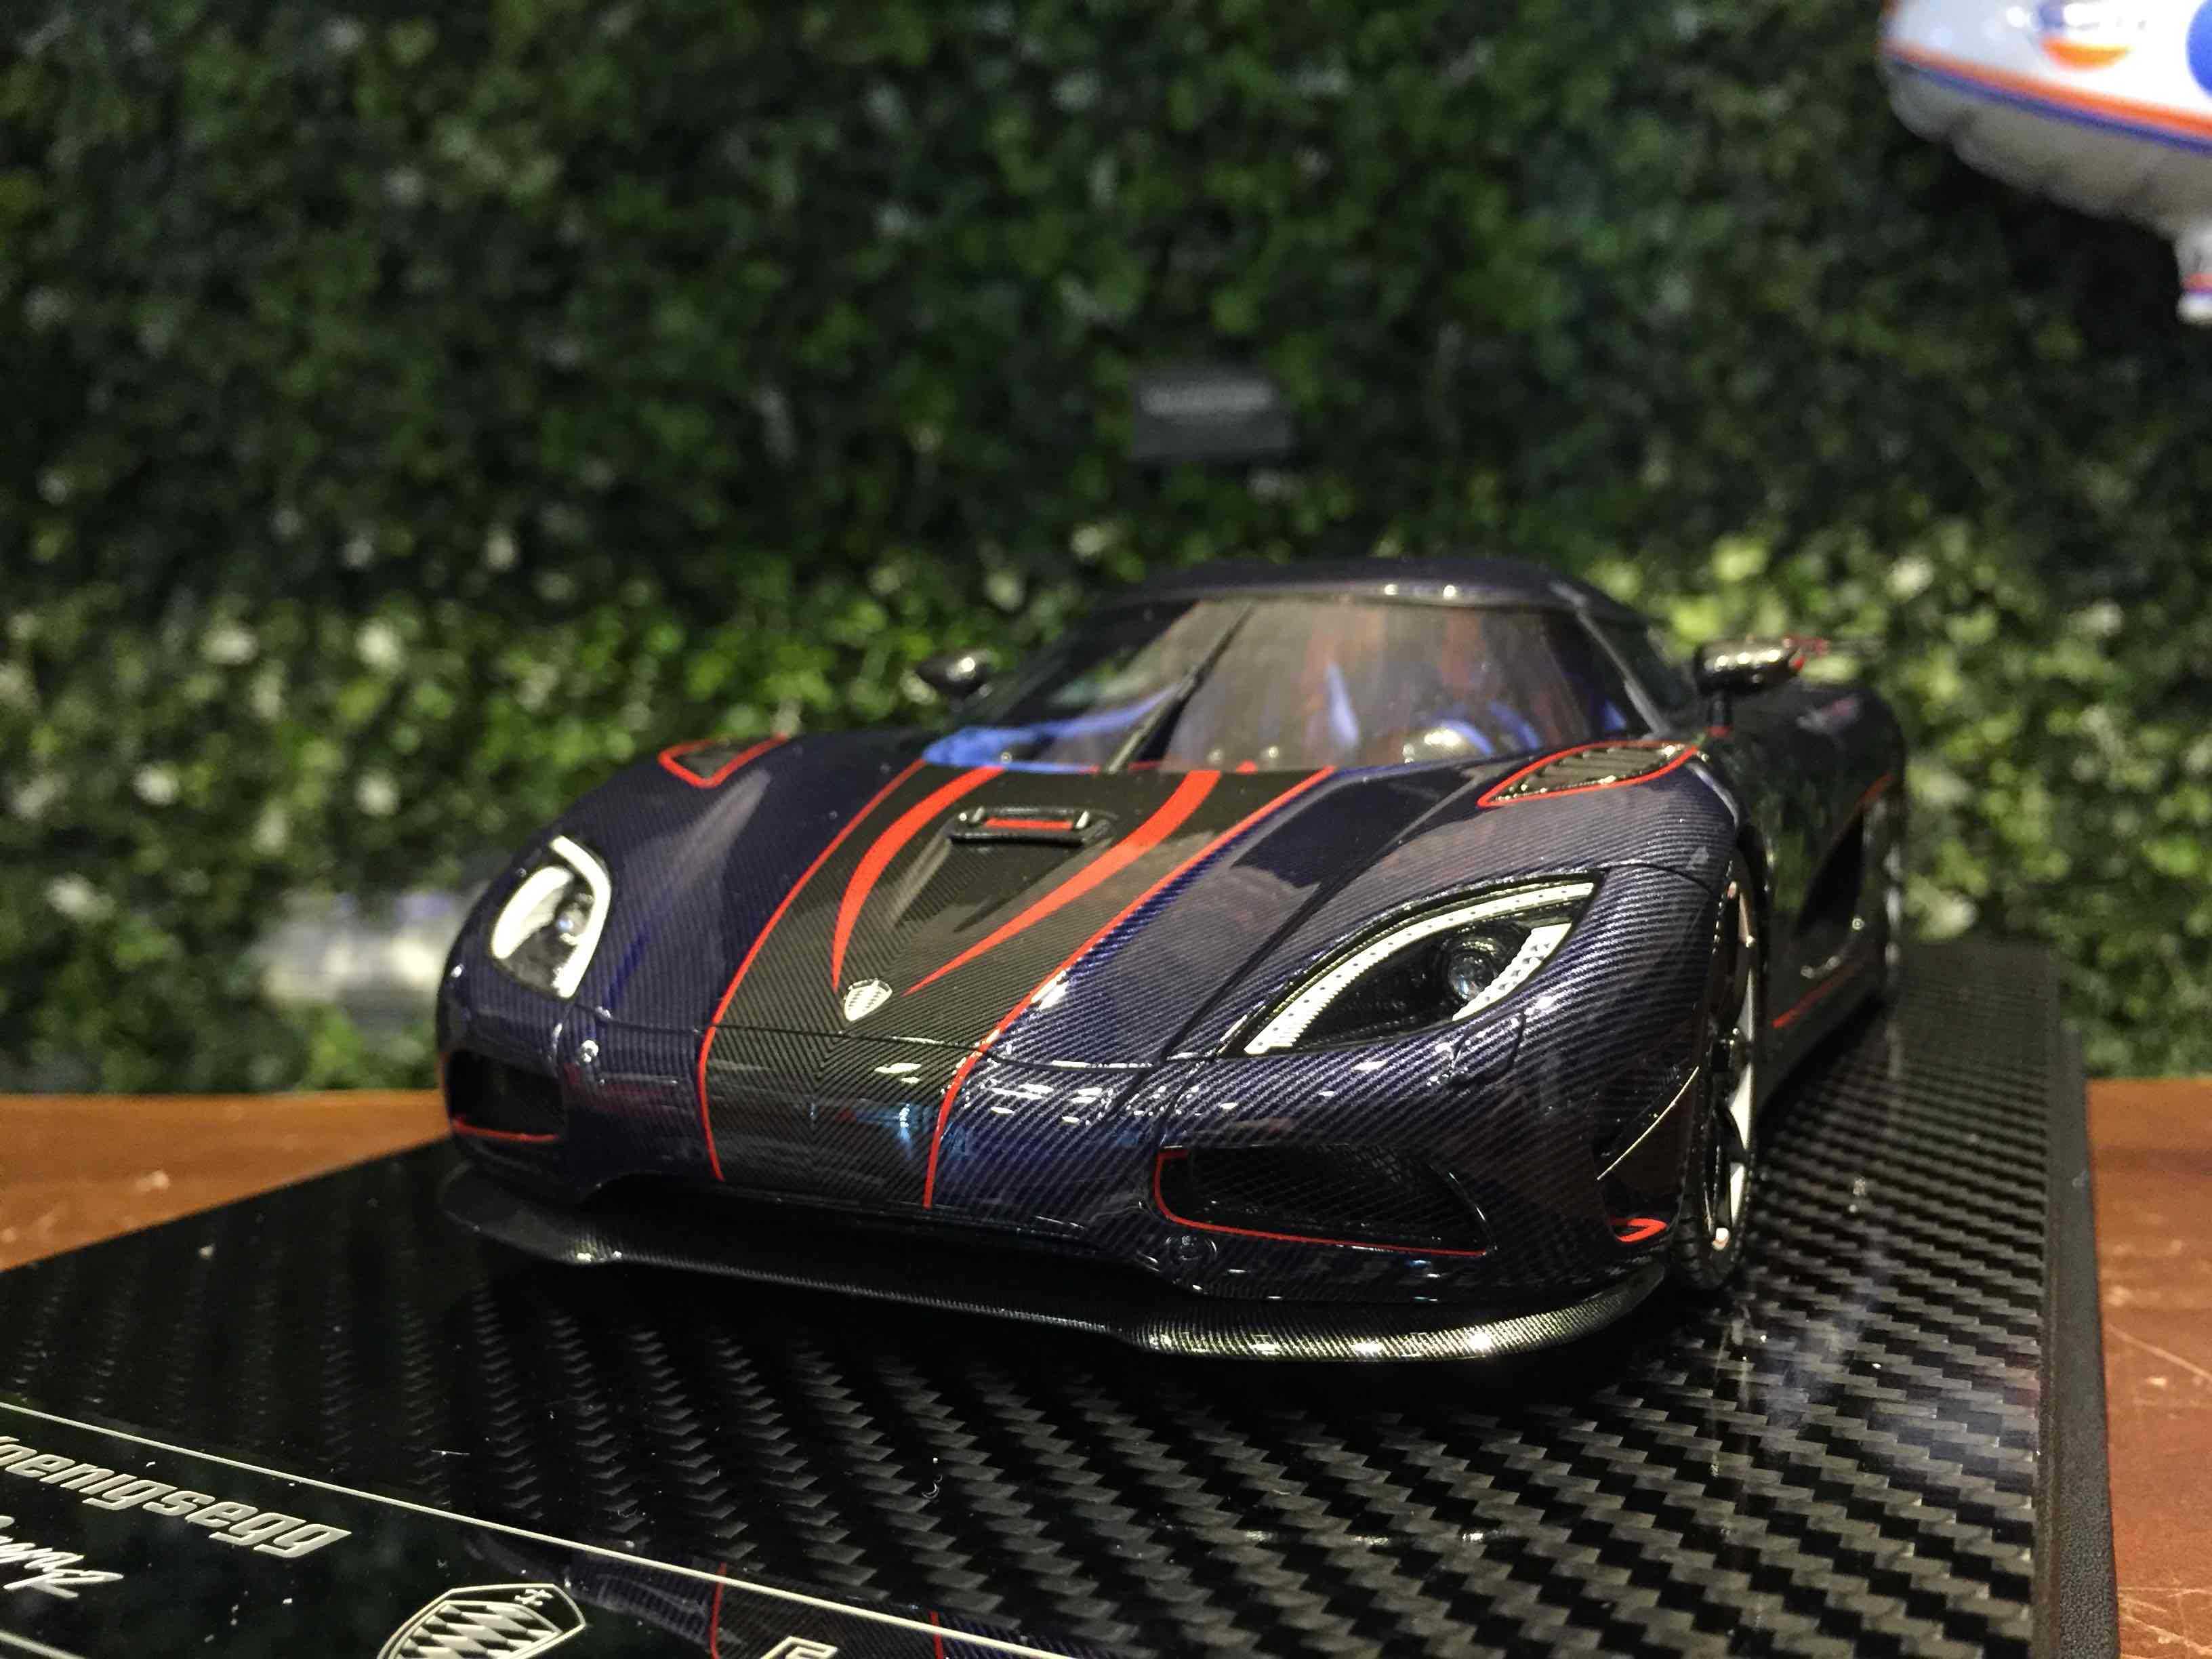 1/18 FrontiArt Koenigsegg Agera R Carbon Blue F051-167【MGM】